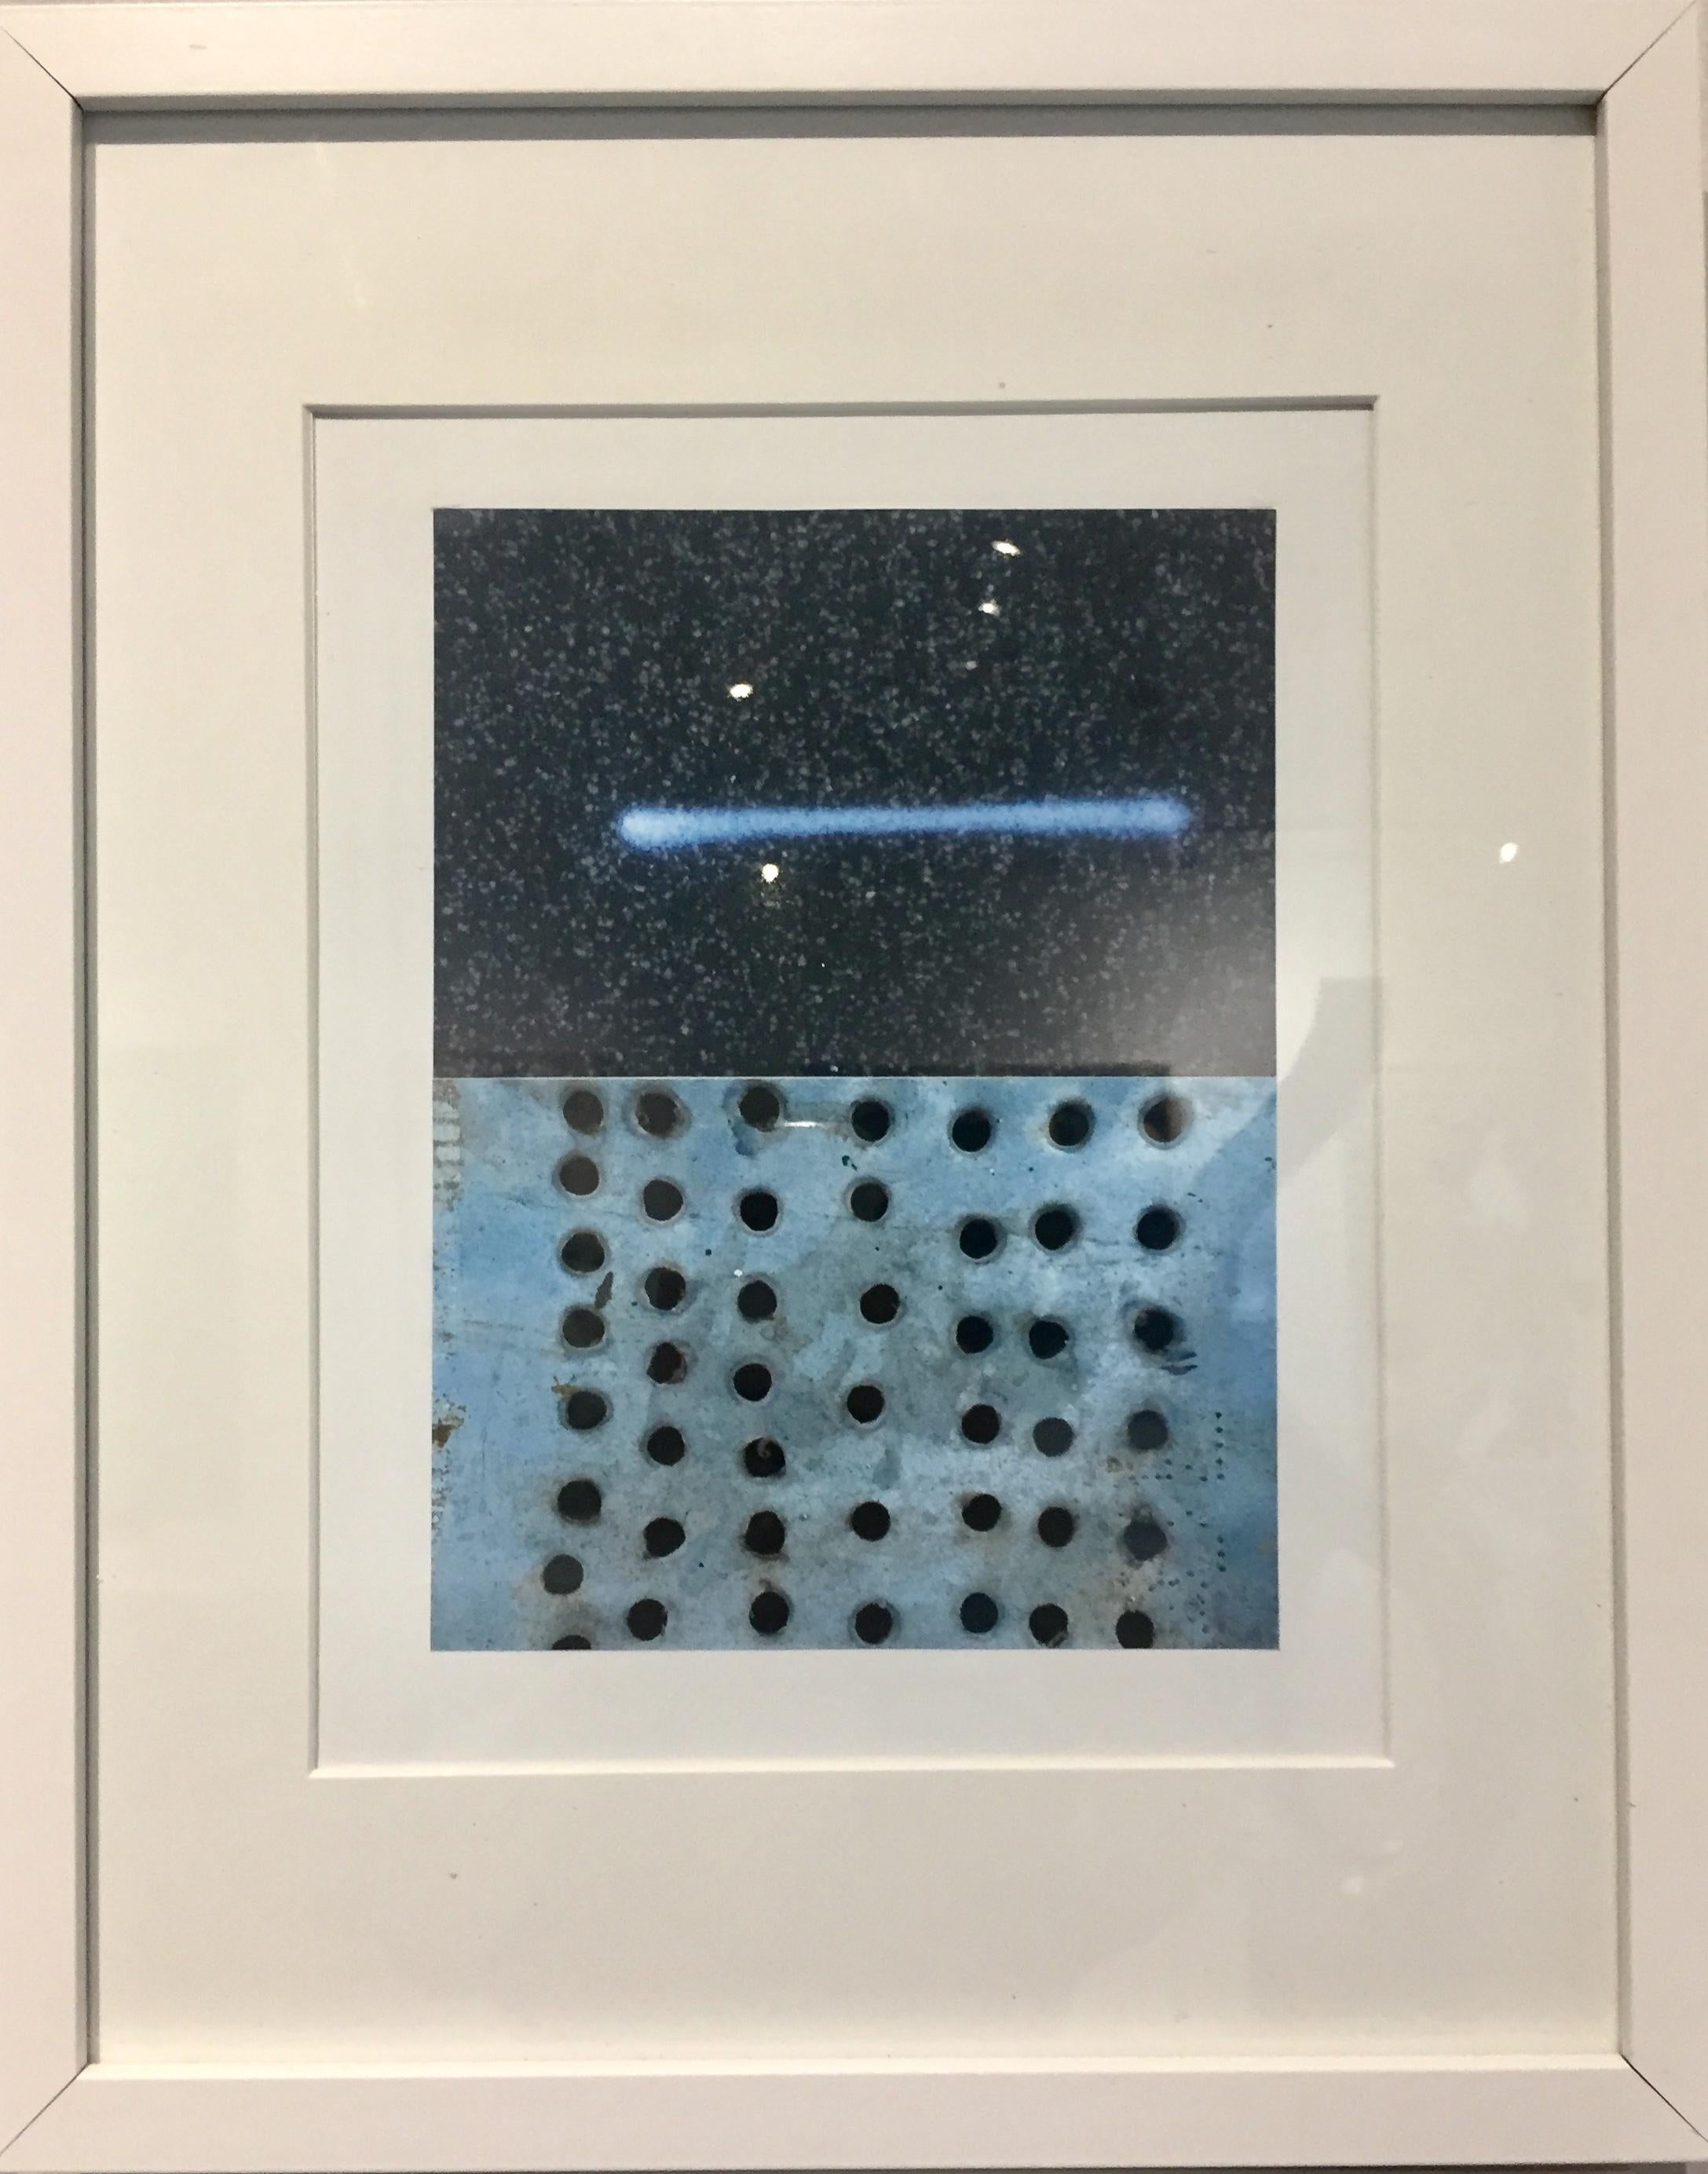 Pat Place Abstract Photograph - Untitled (ABSTRACT SPECKS & HOLES STREET MARKINGS, NEW YORK CITY PHOTOGRAPHY)